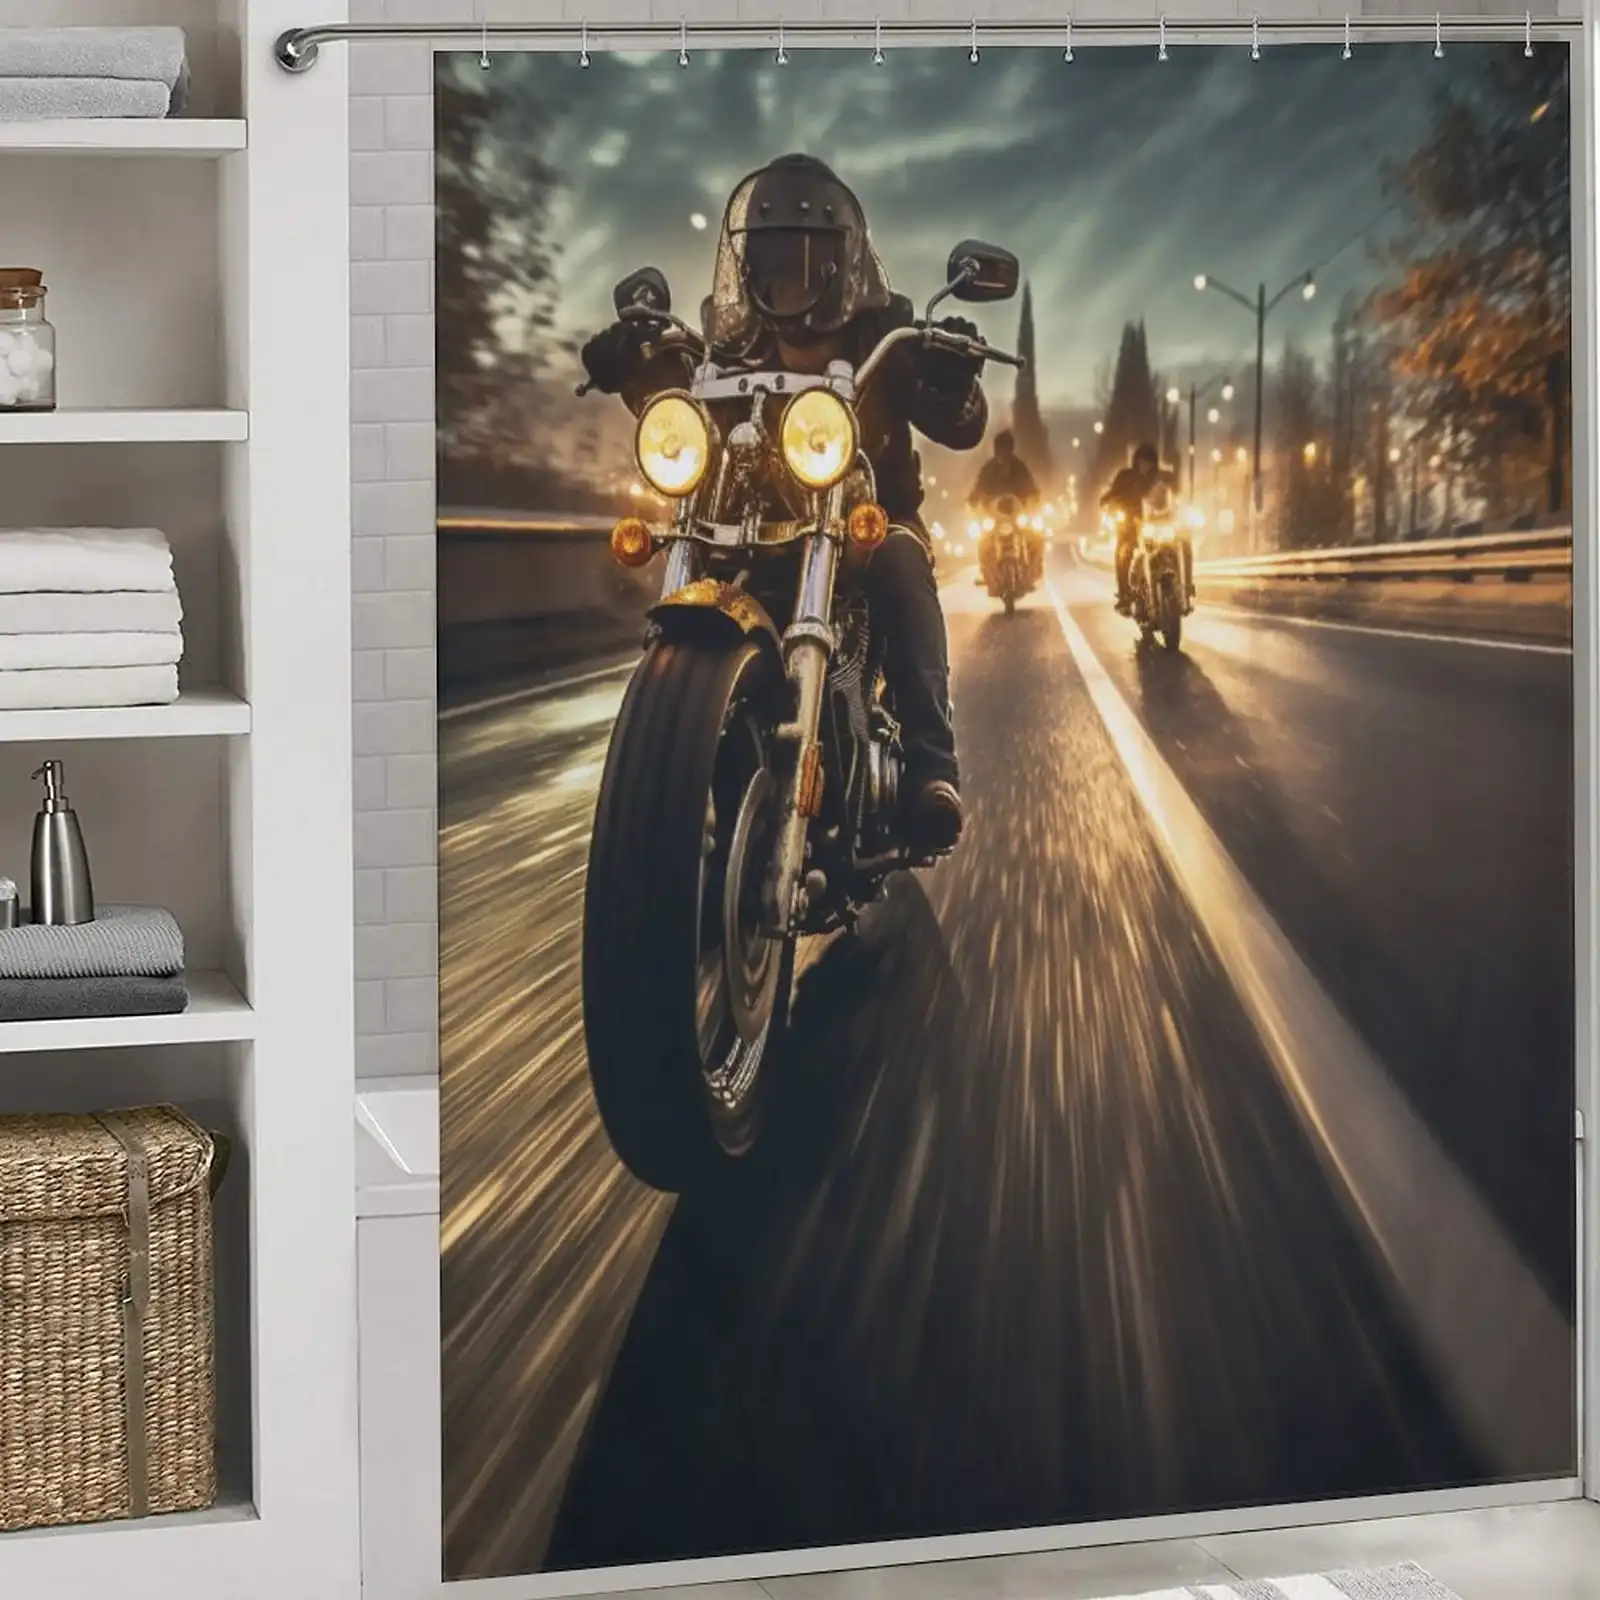 Unique Shower Curtains for Small Bathrooms: A shower curtain with a motorcycle on the road.